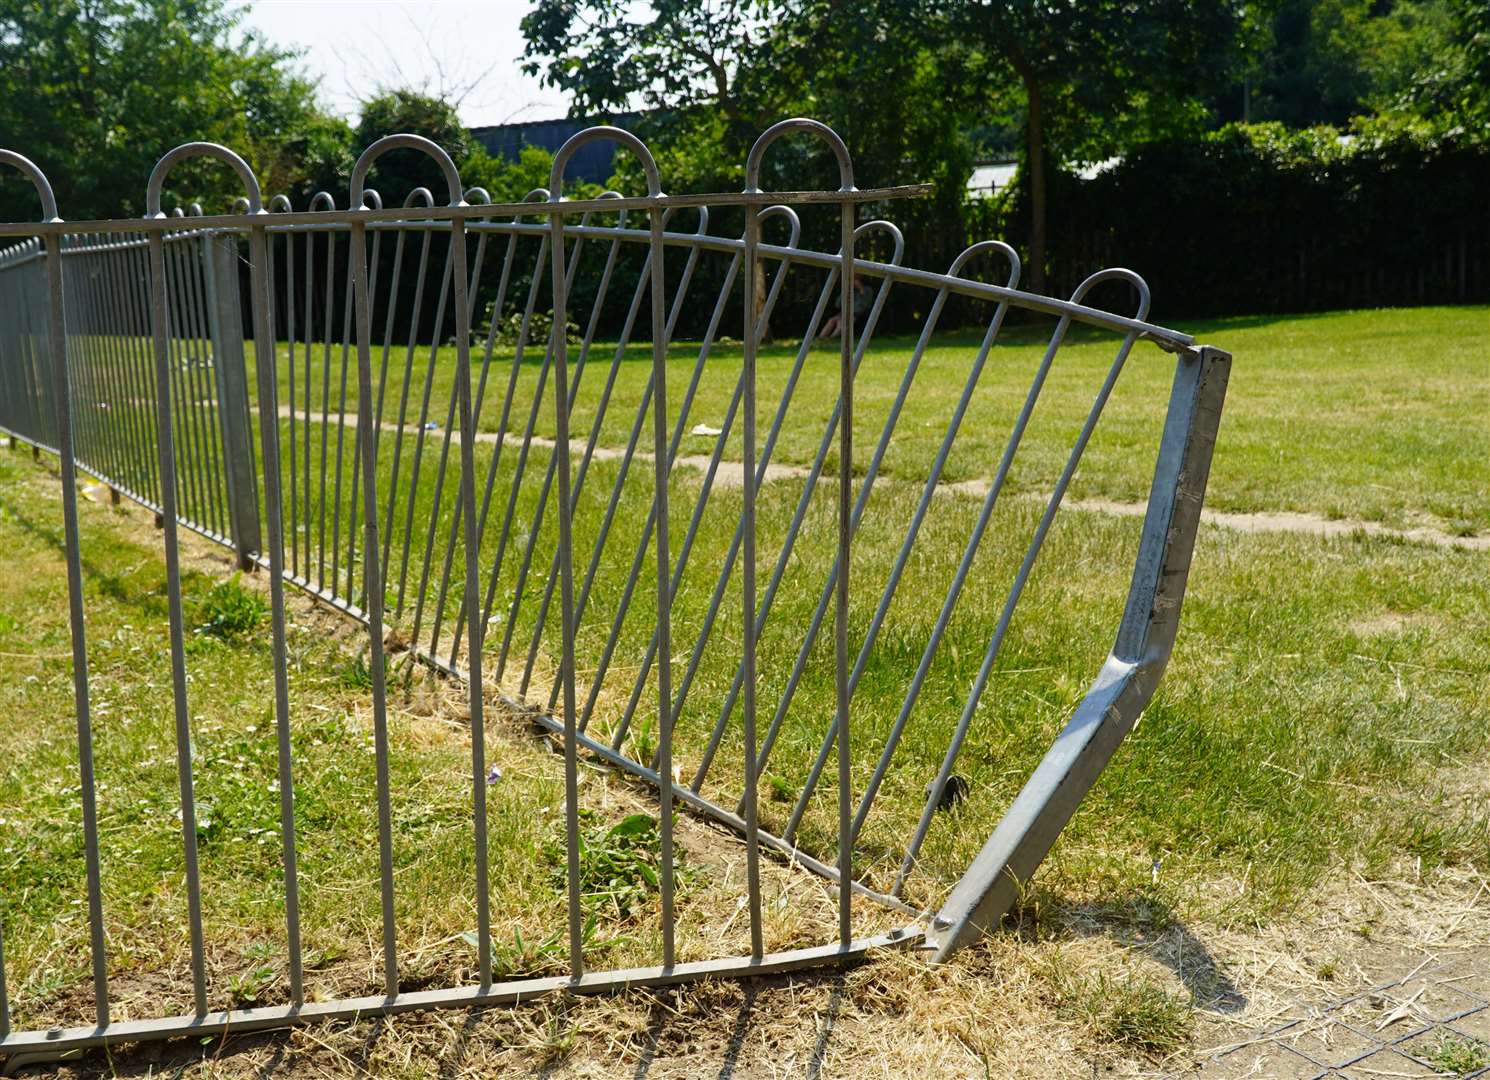 The HGV damaged the fence of a children's play park